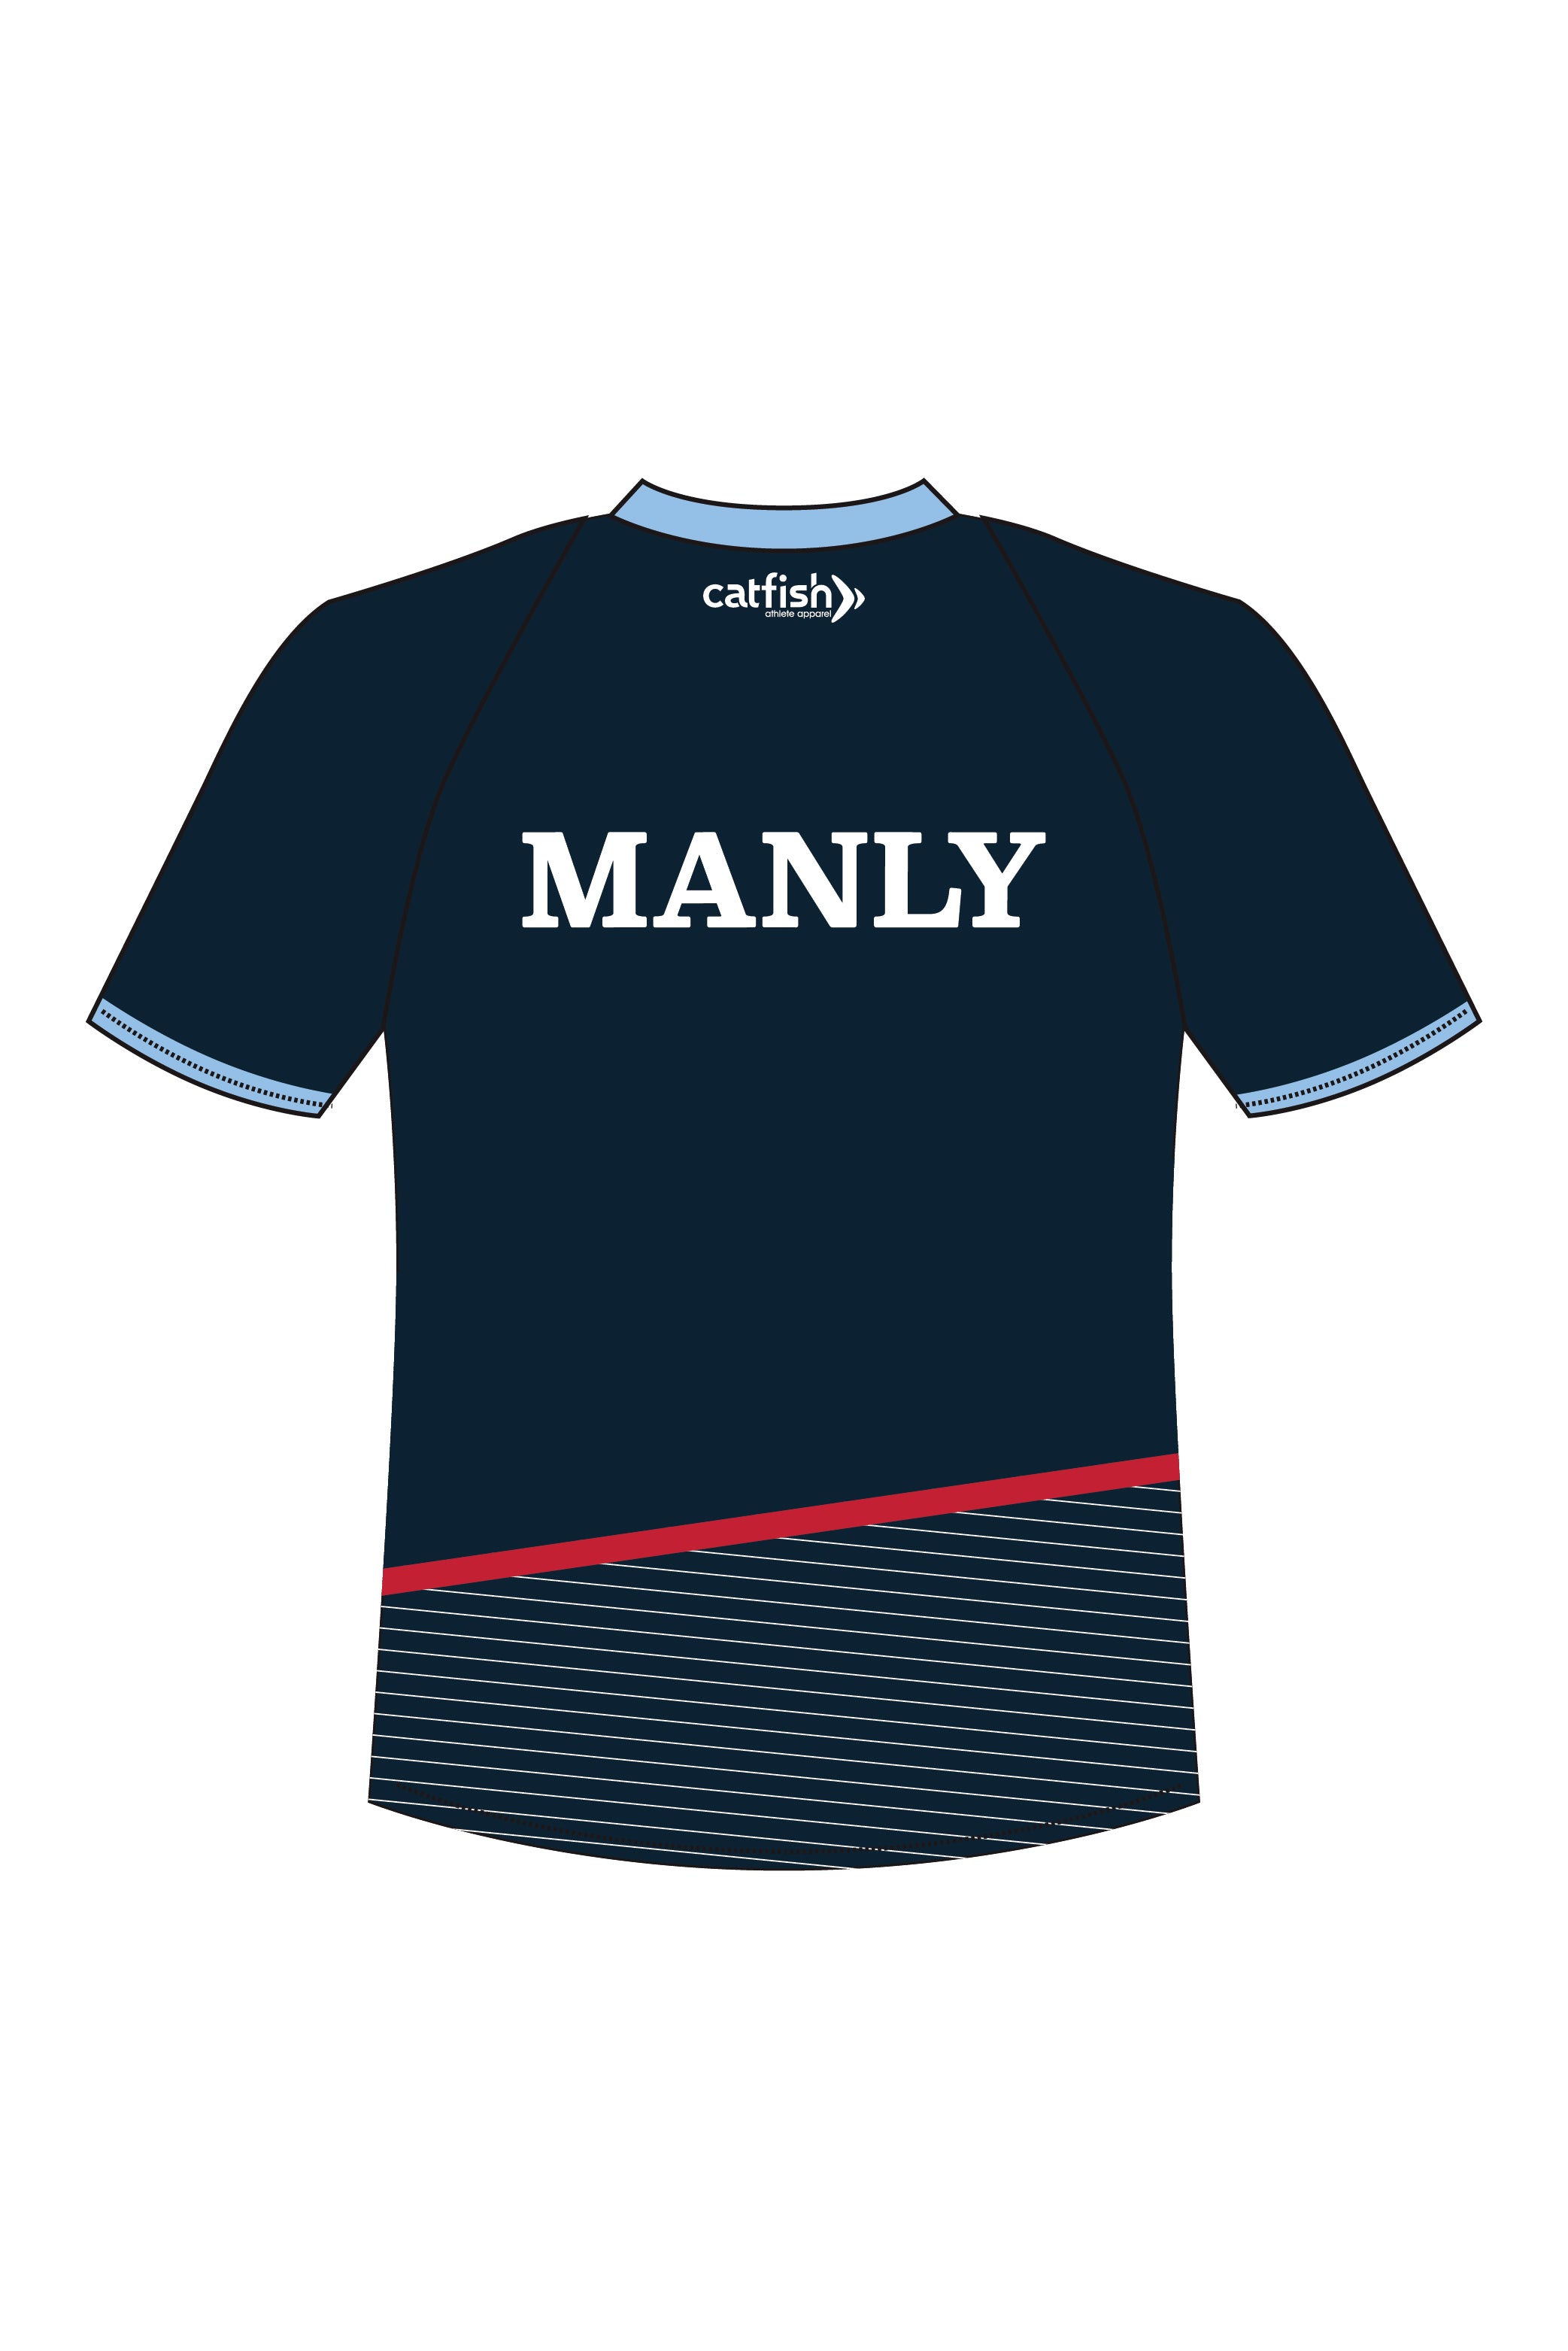 Manly Swimming Club Kid's Sports Tee